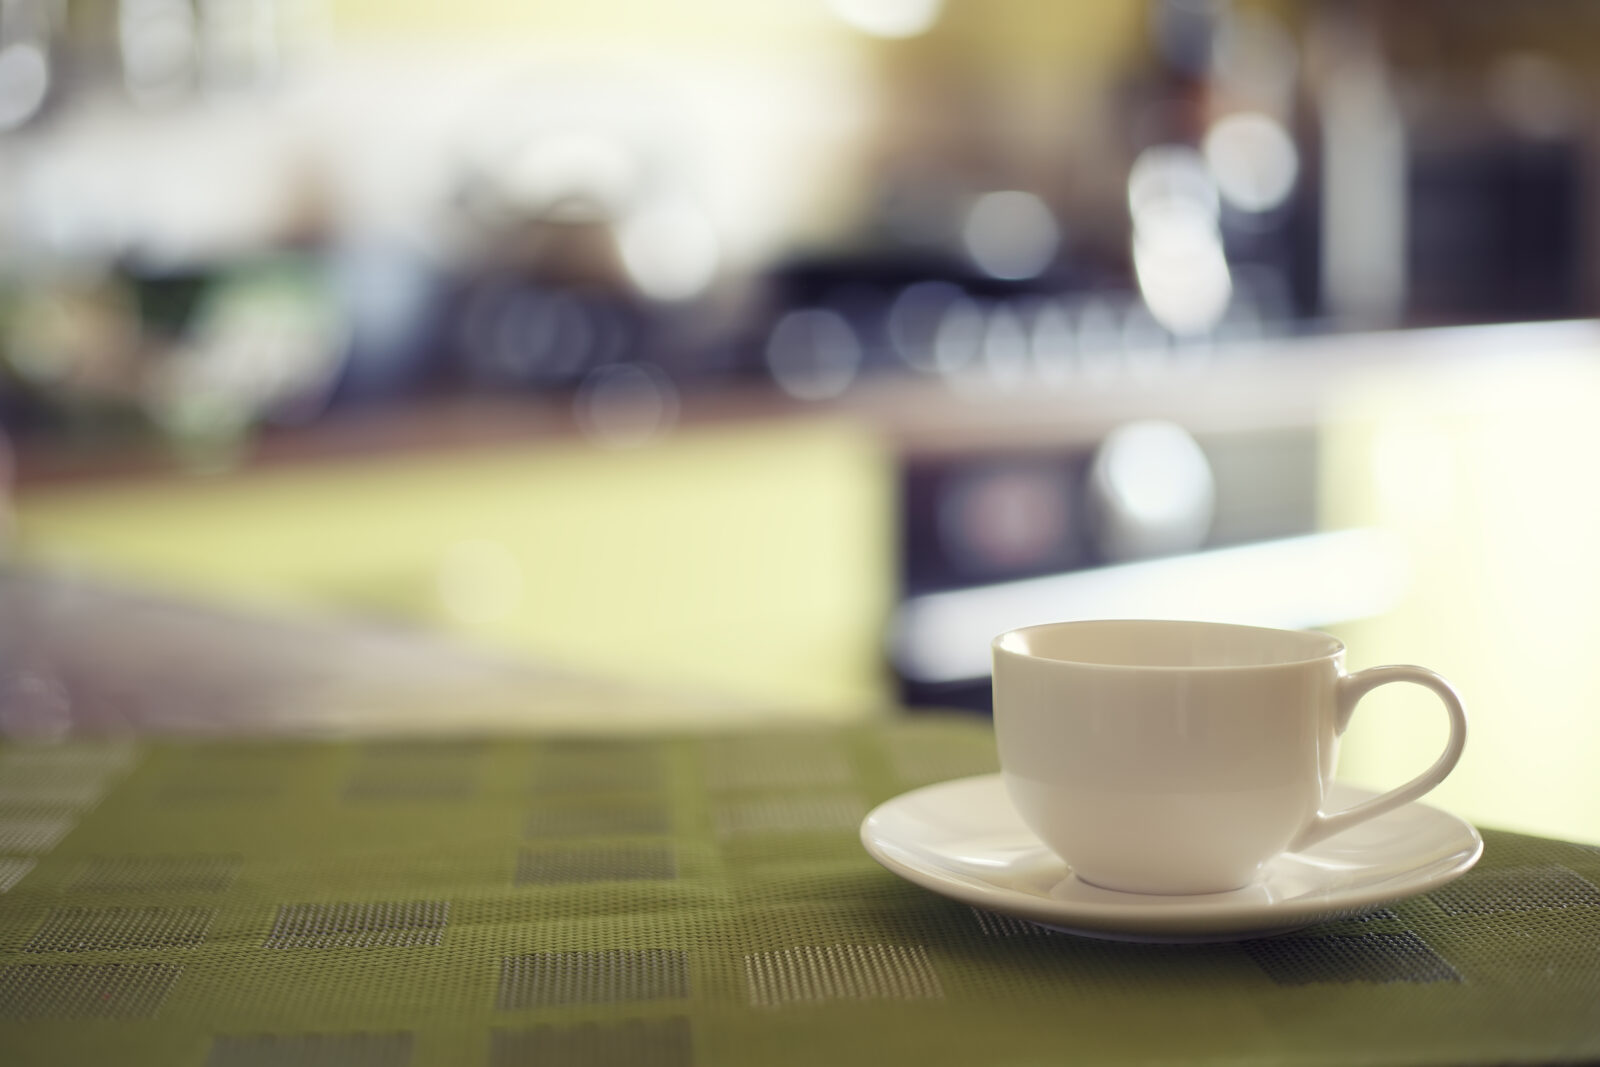 cup of coffee on blurred background